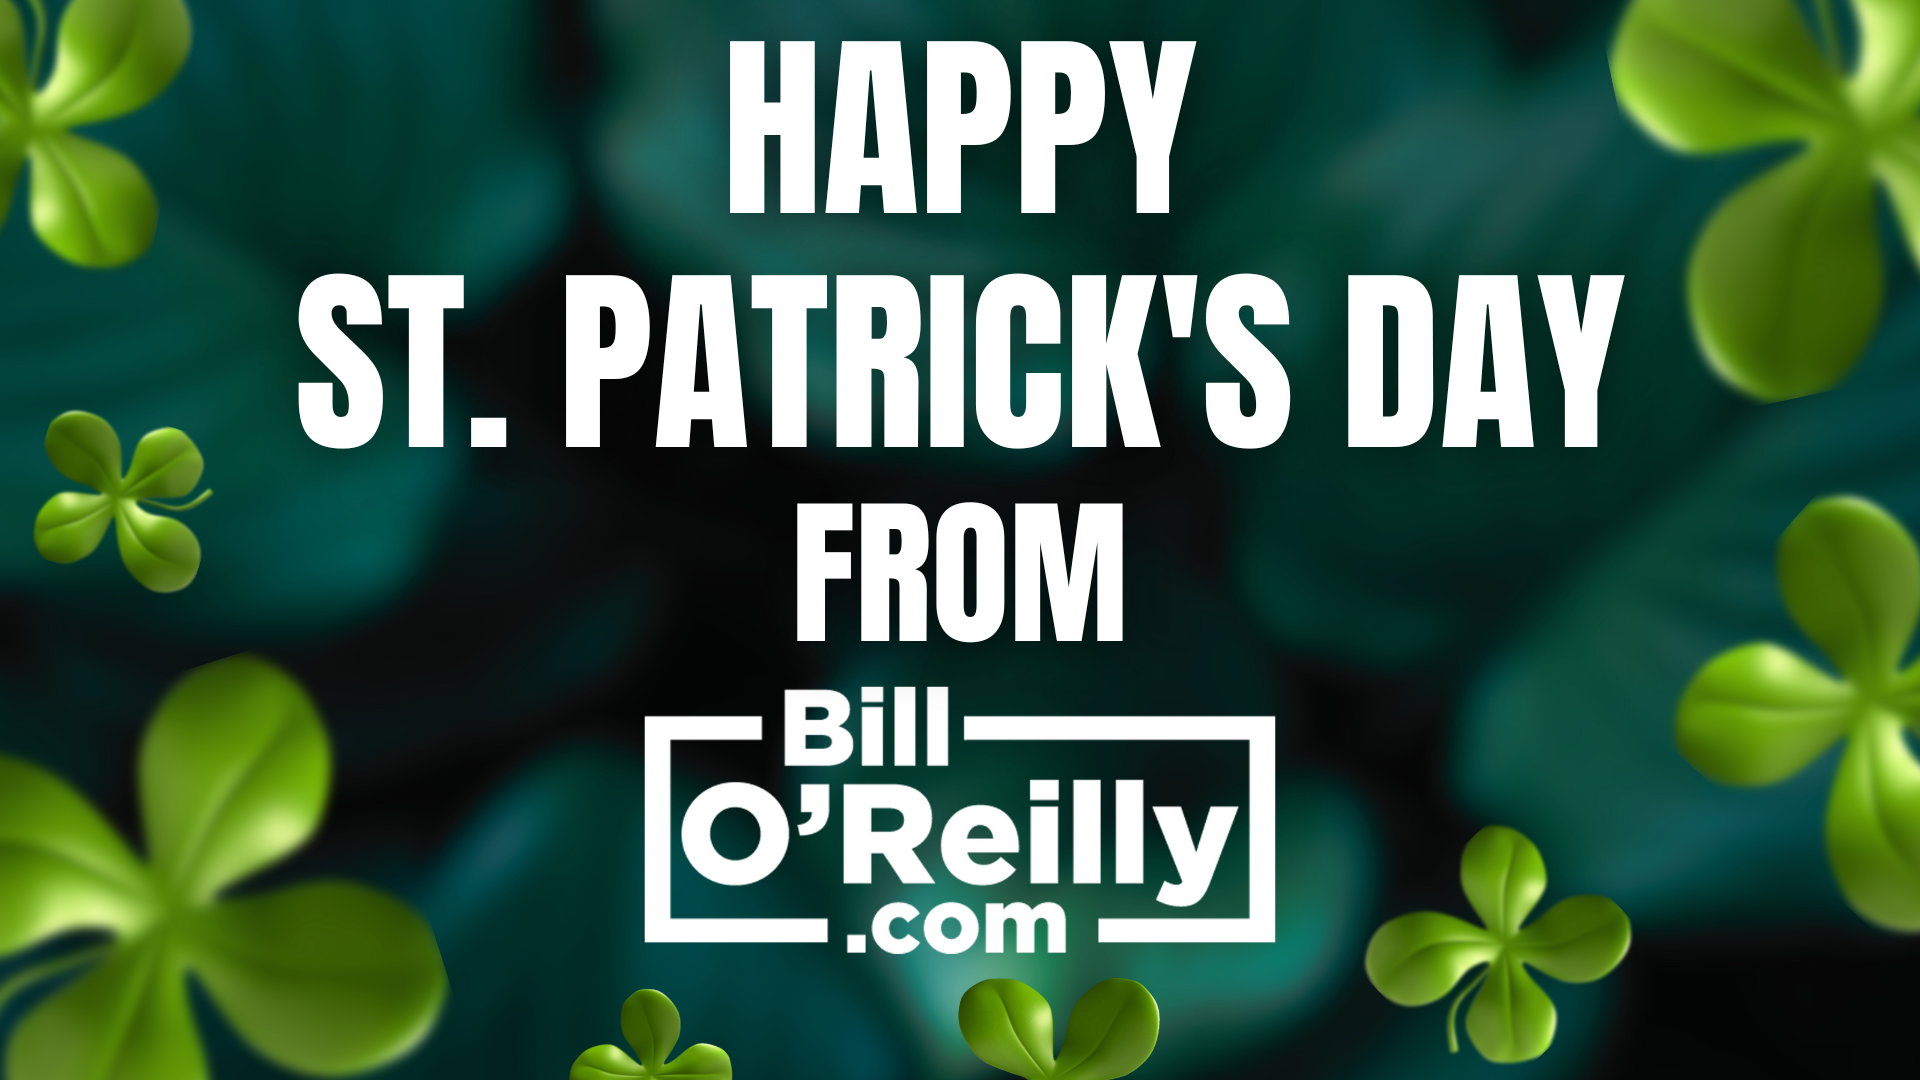 St. Patrick's Day on BillOReilly.com